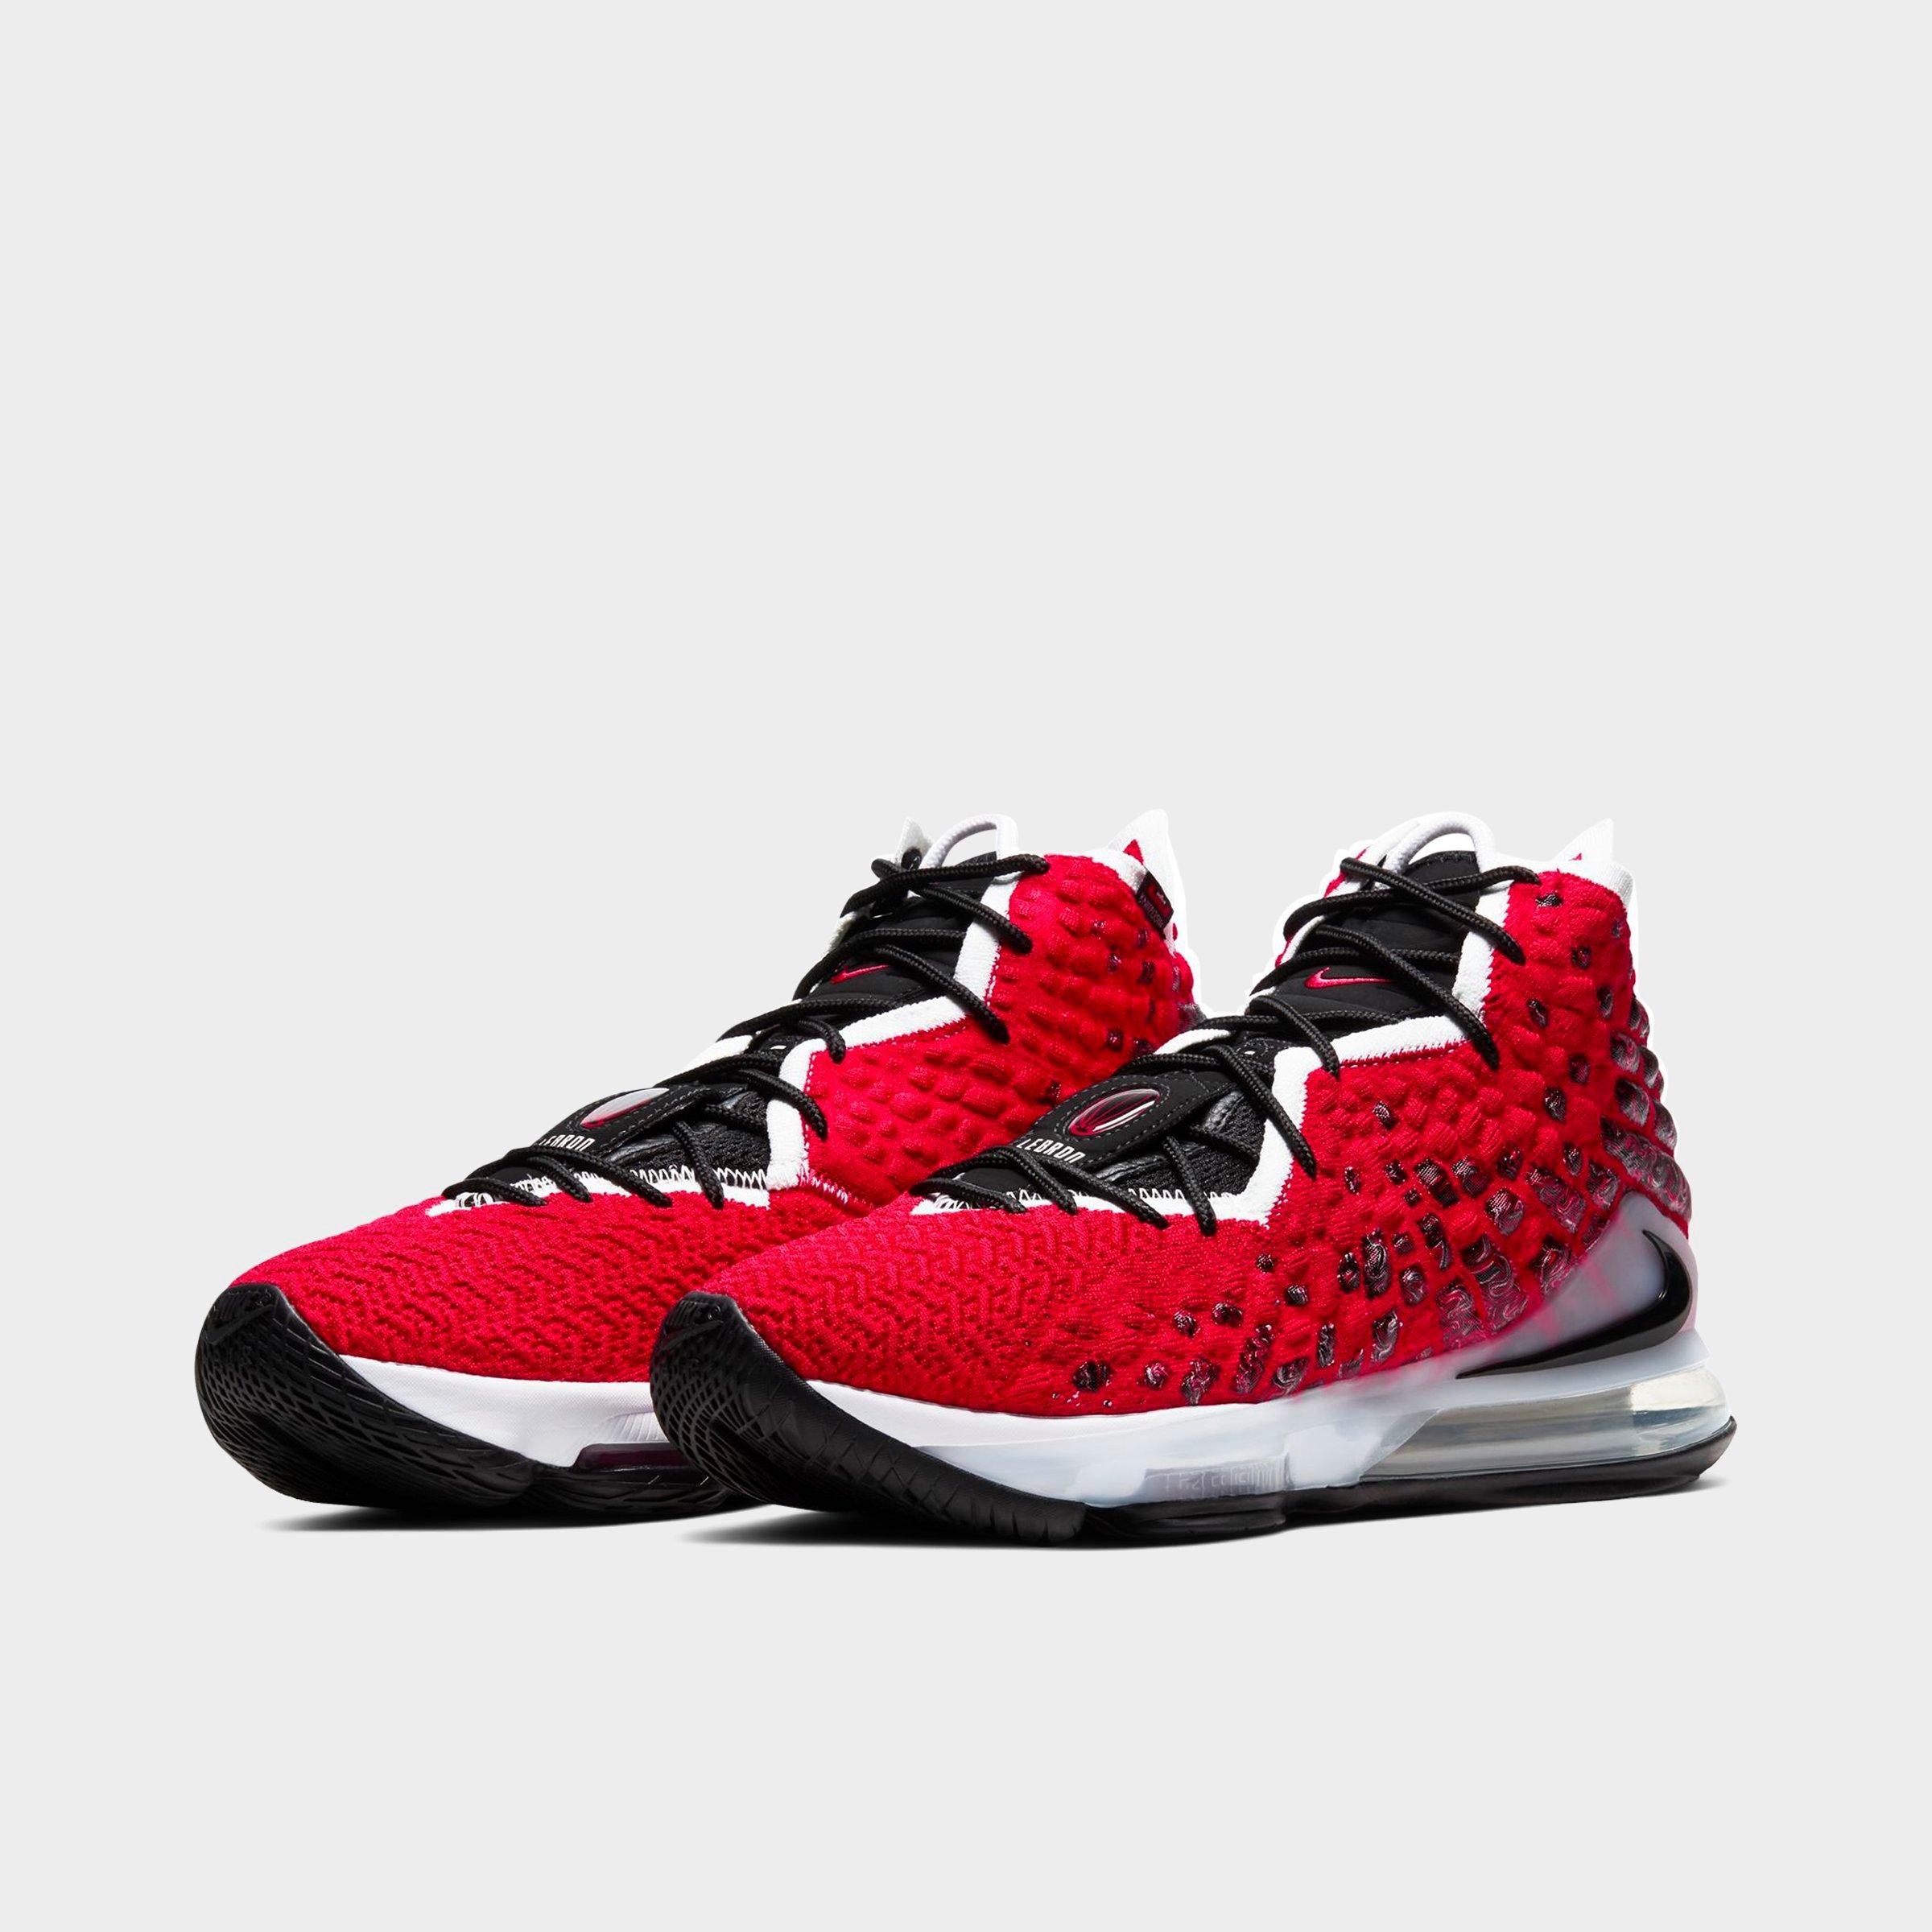 red and white lebron 18